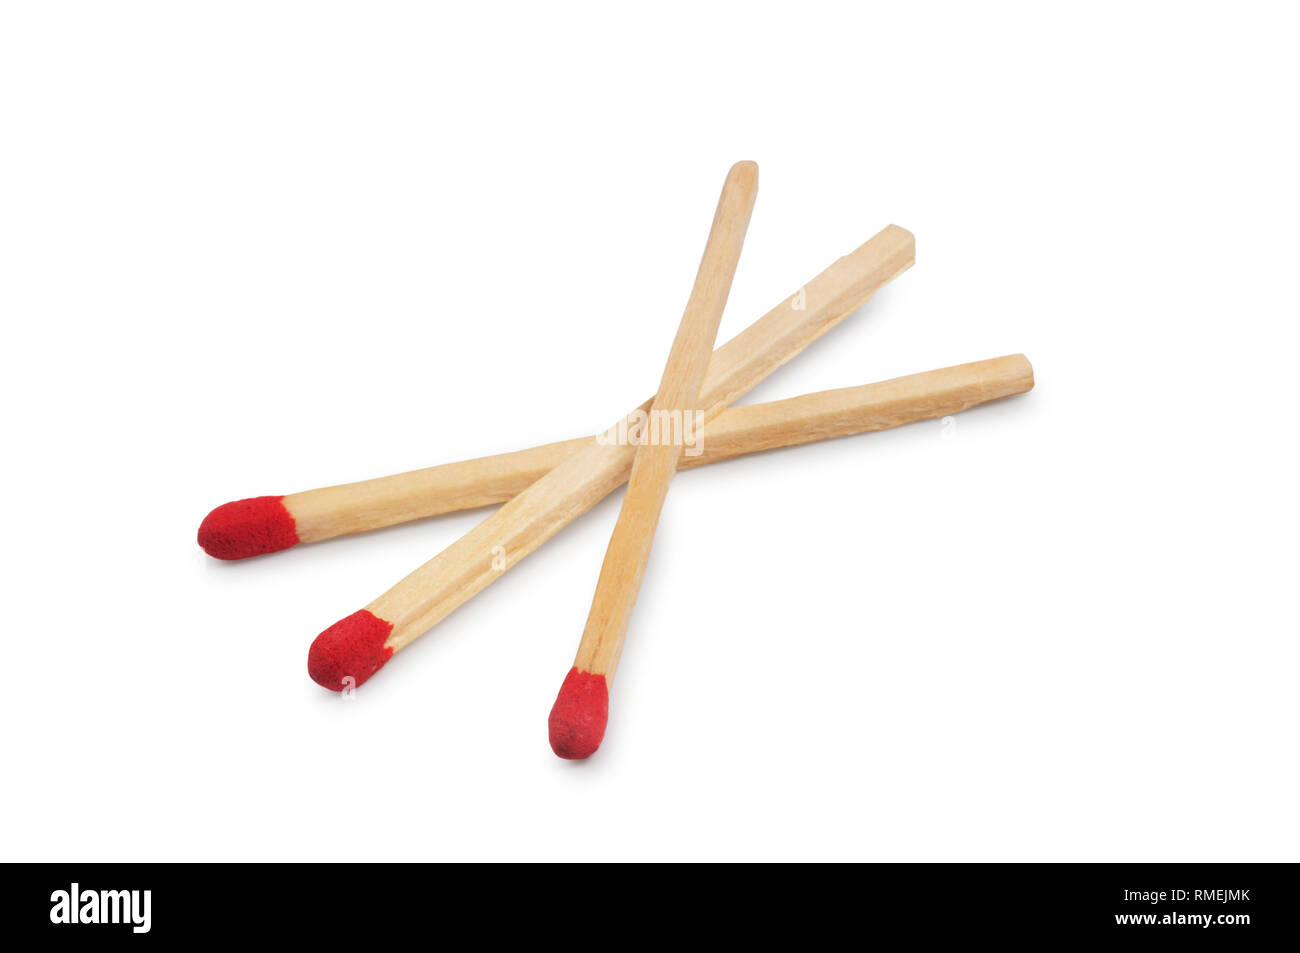 Studio shot of unlit matches isolated on a white background - John Gollop Stock Photo